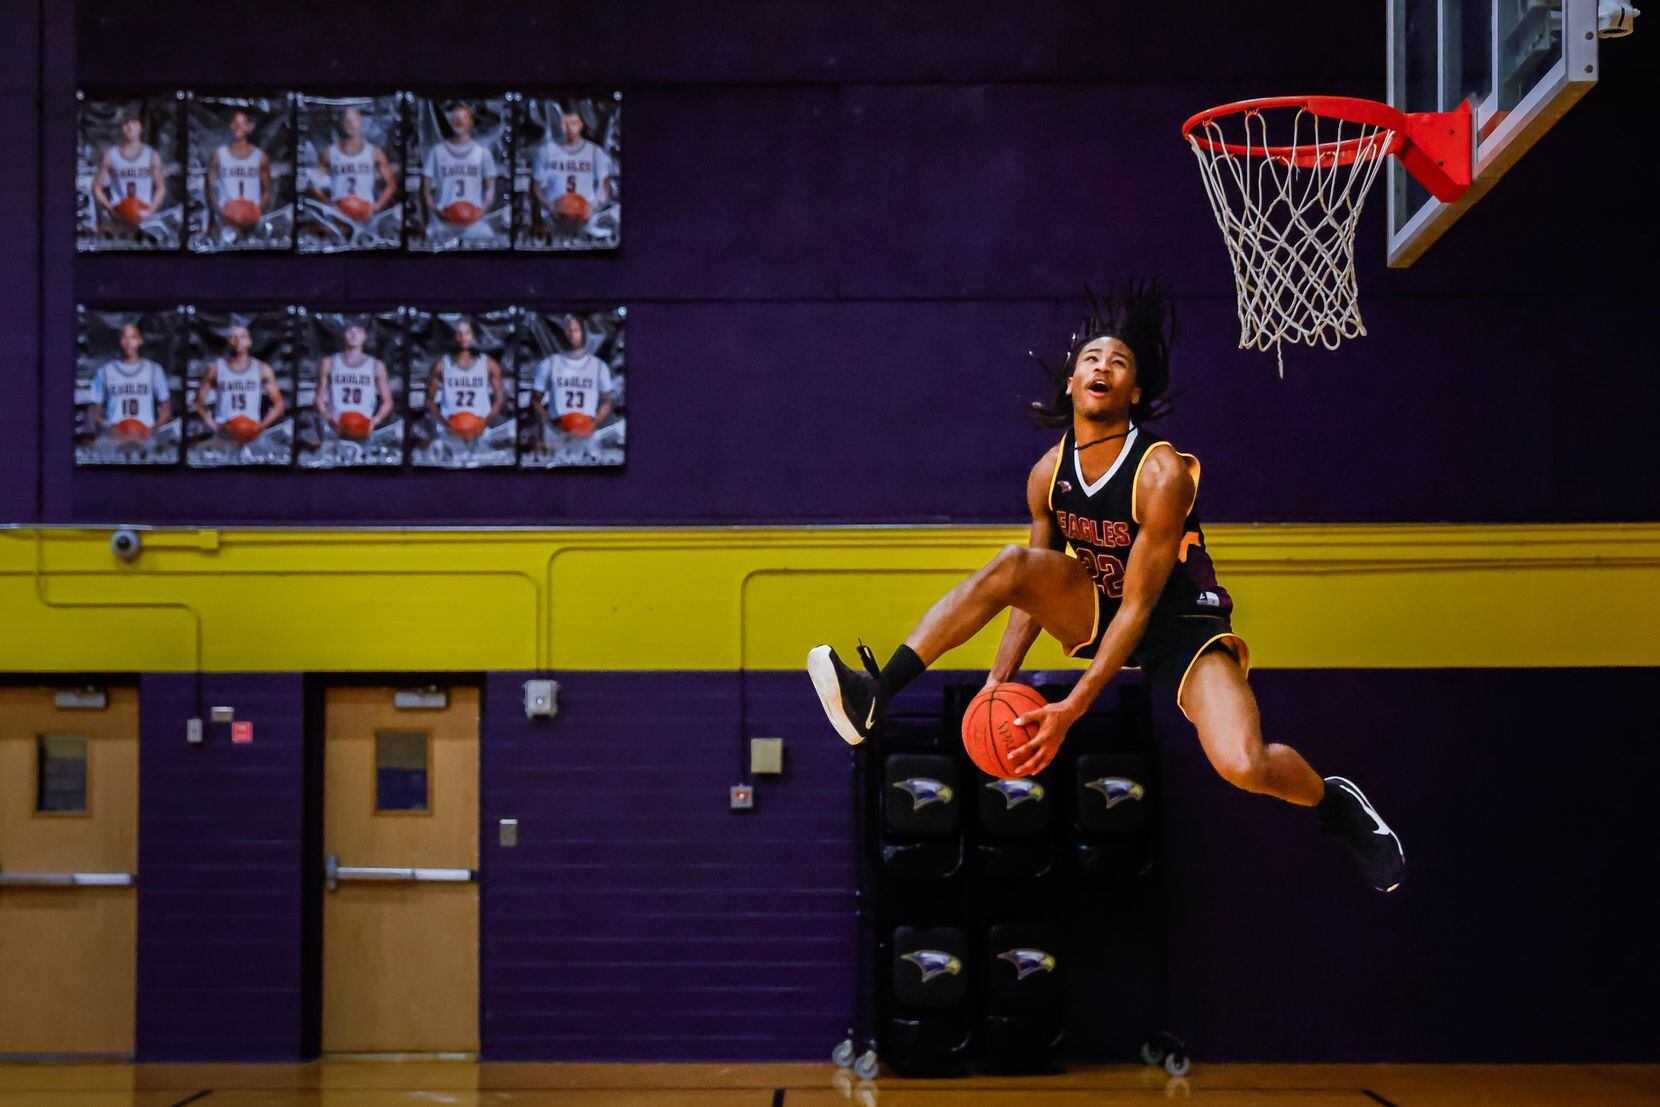 Richardson basketball player Cason Wallace dunks the basketball during a photoshoot in...